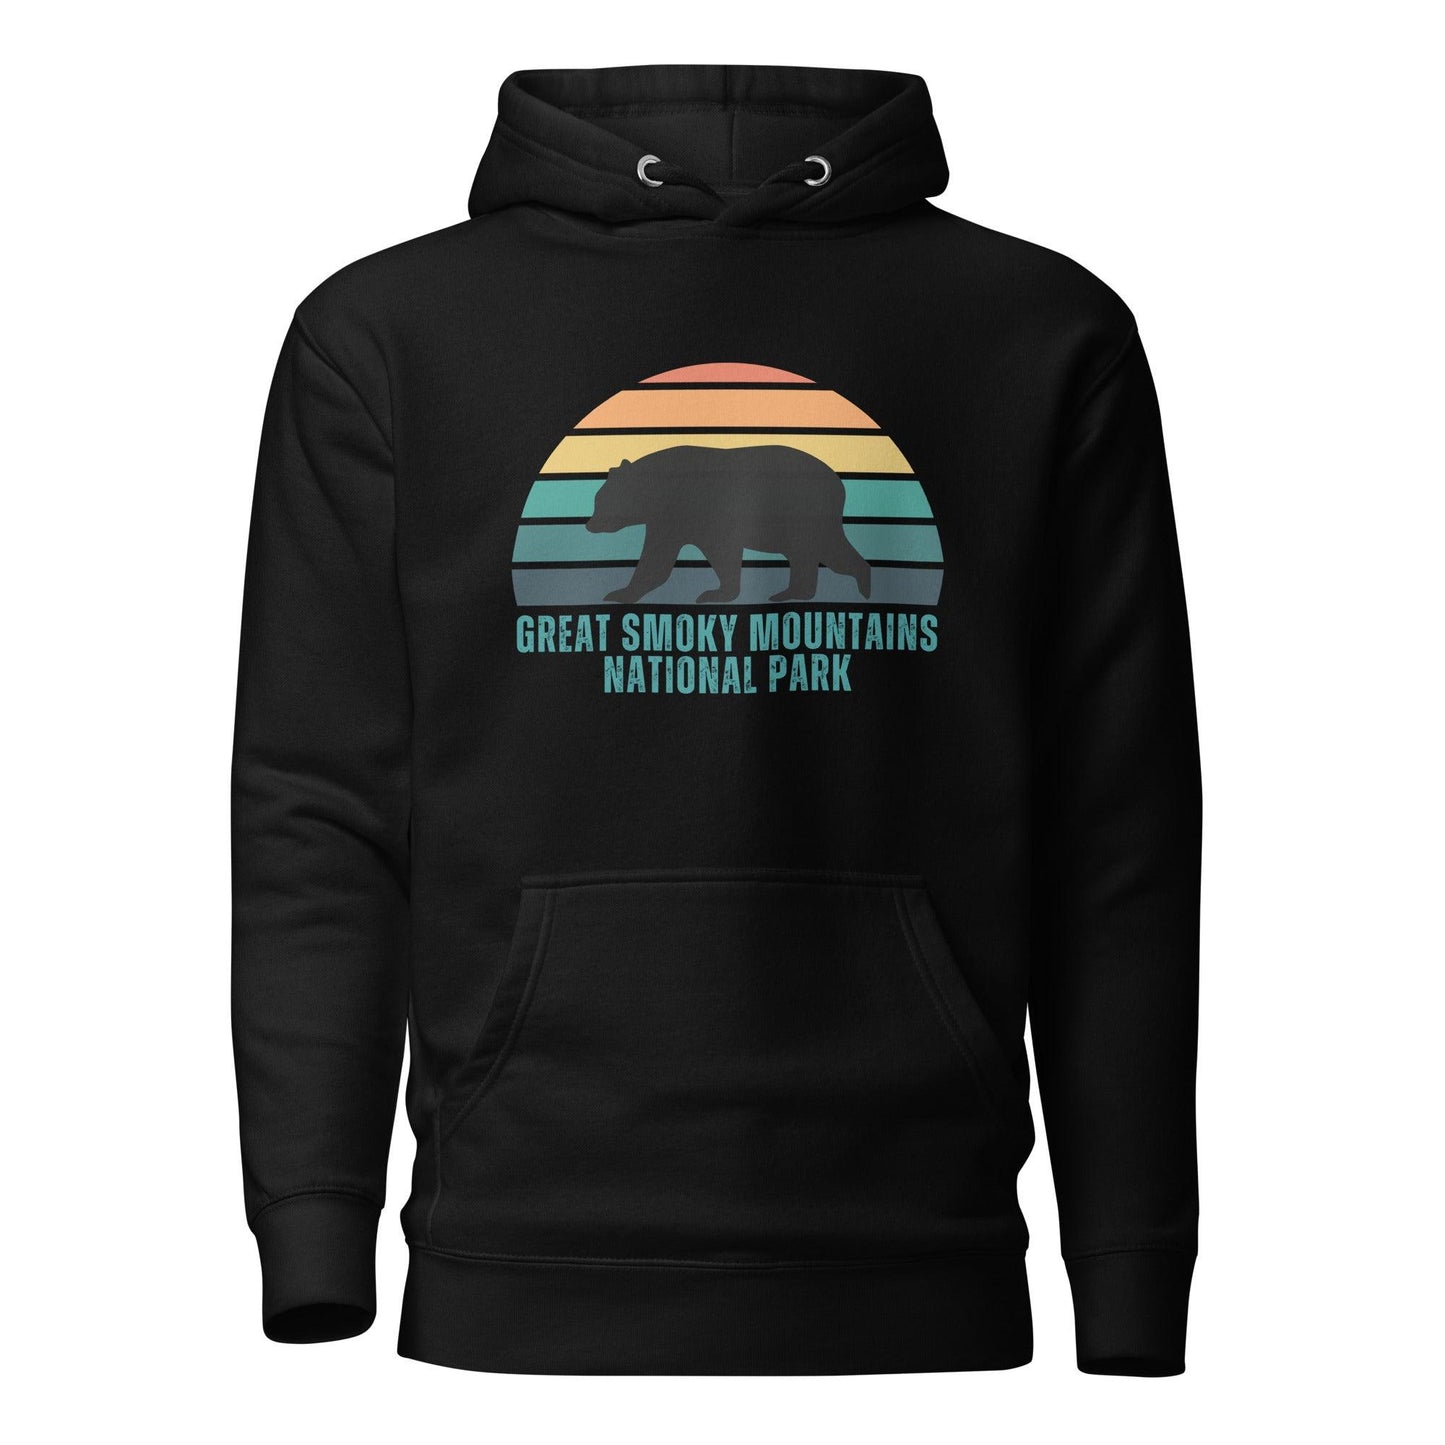 Great Smoky Mountains National Park Hoodie - Adventure Threads Company